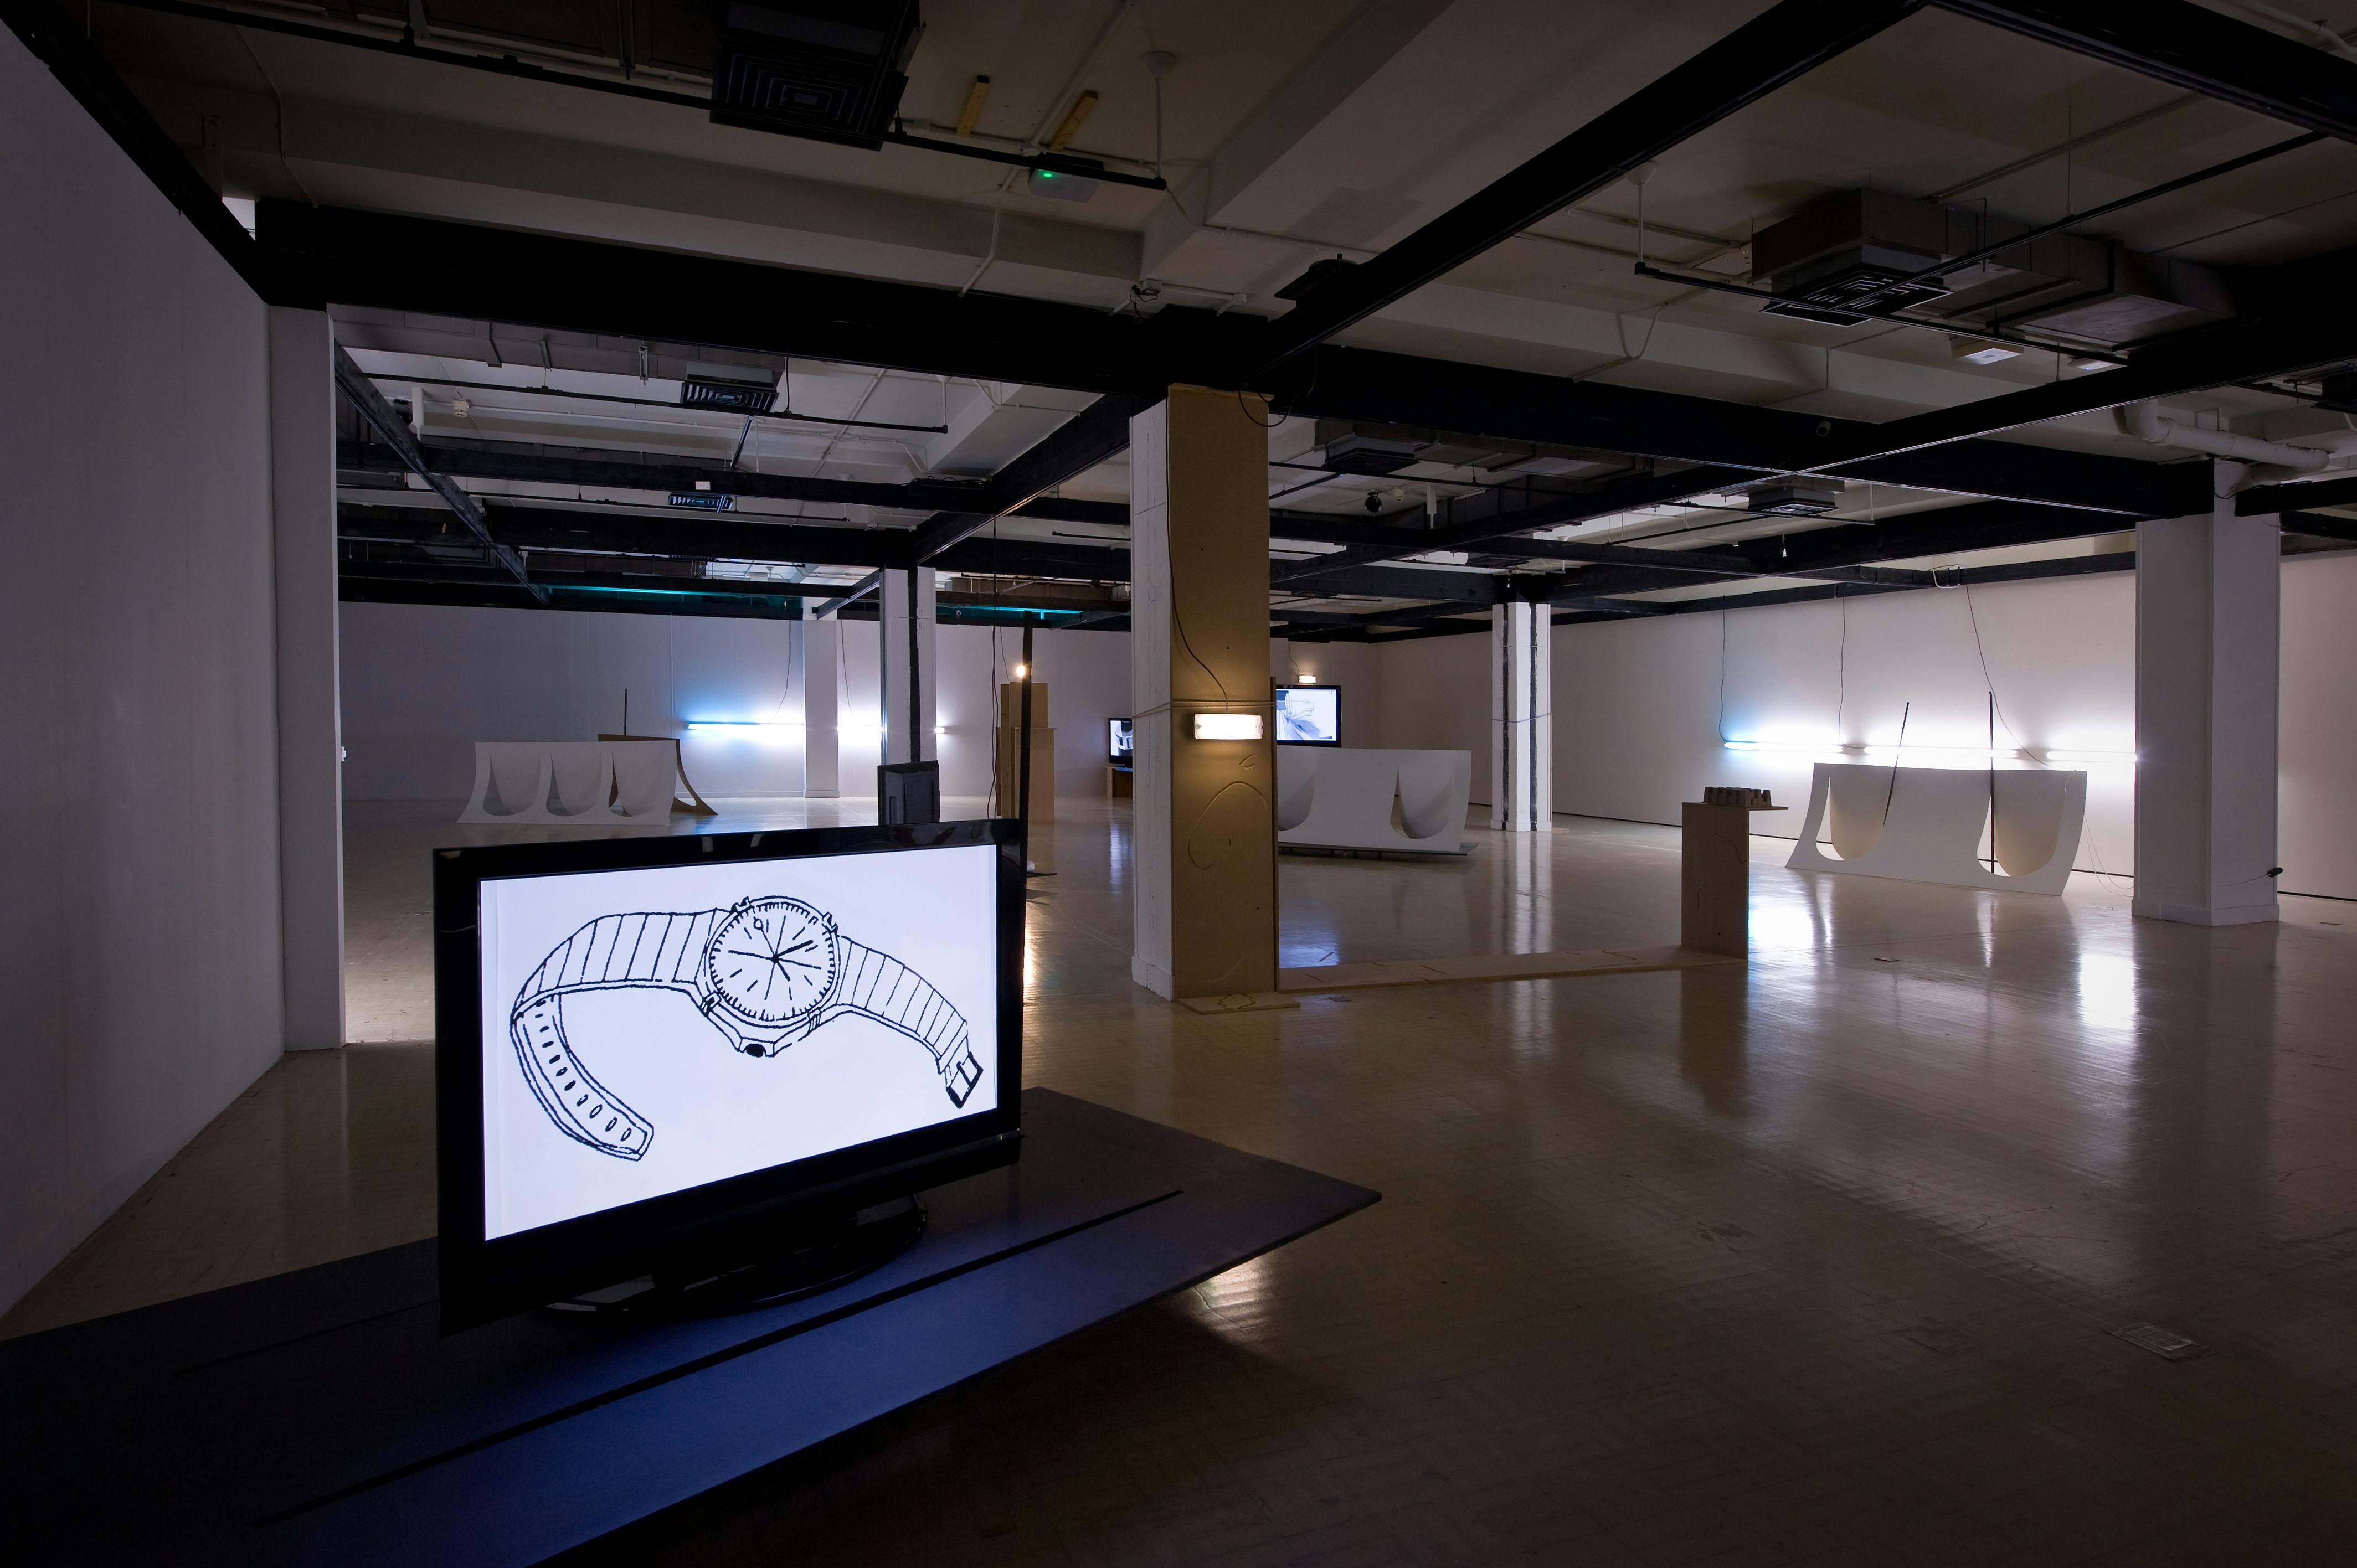 An installation in a darkened gallery with flat screen TV monitors on mobile platforms. The screen in the foreground has an image of a watch.